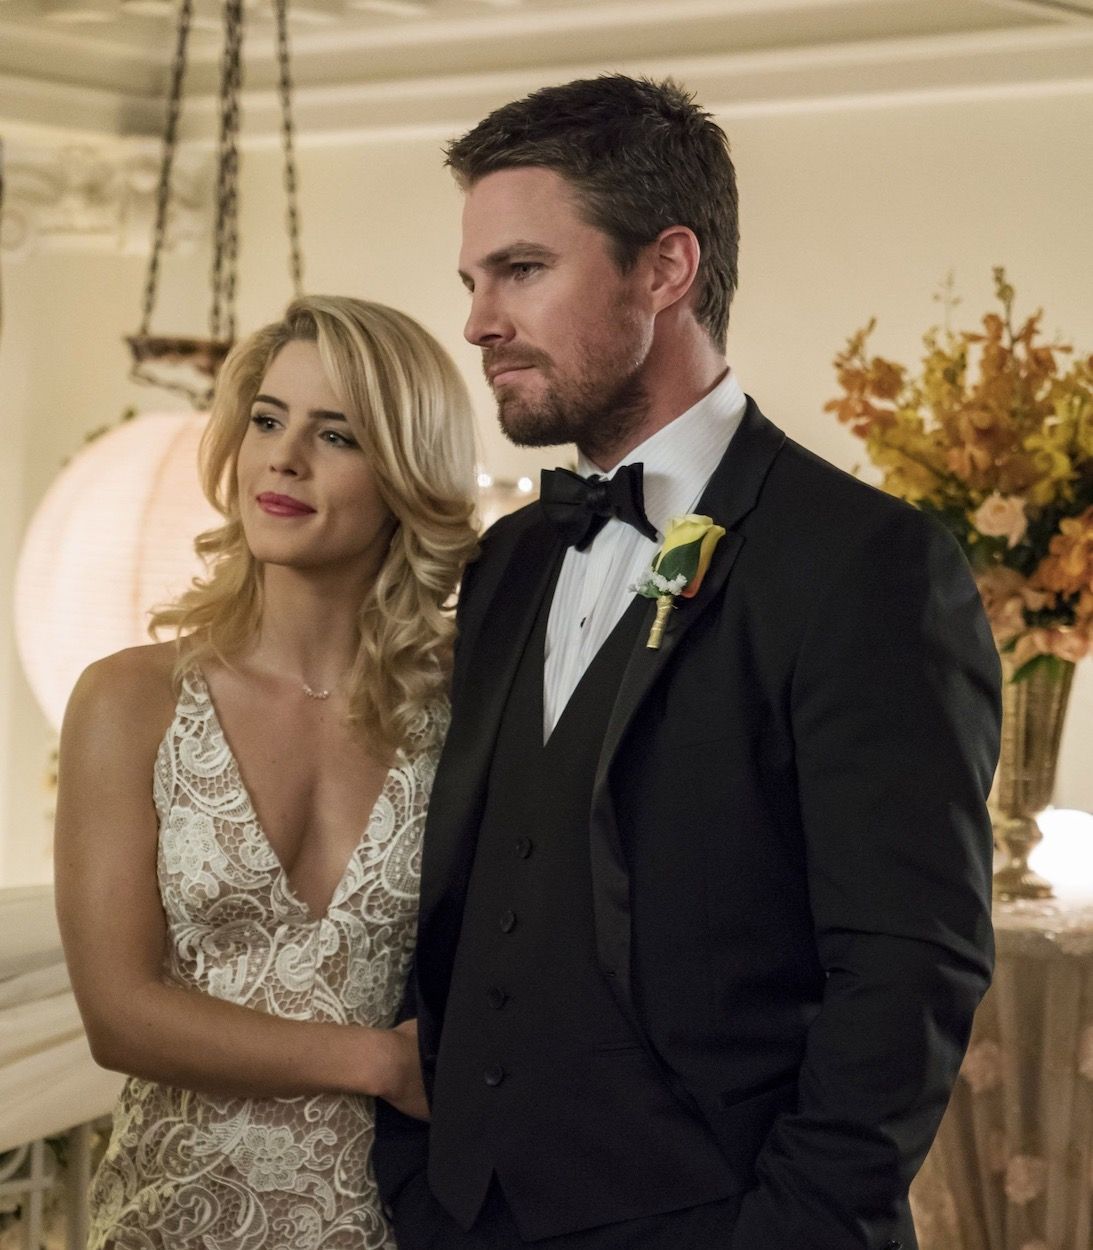 Emily Bett Rickards as Felicity Smoak and Stephen Amell as Oliver Queen in Arrow